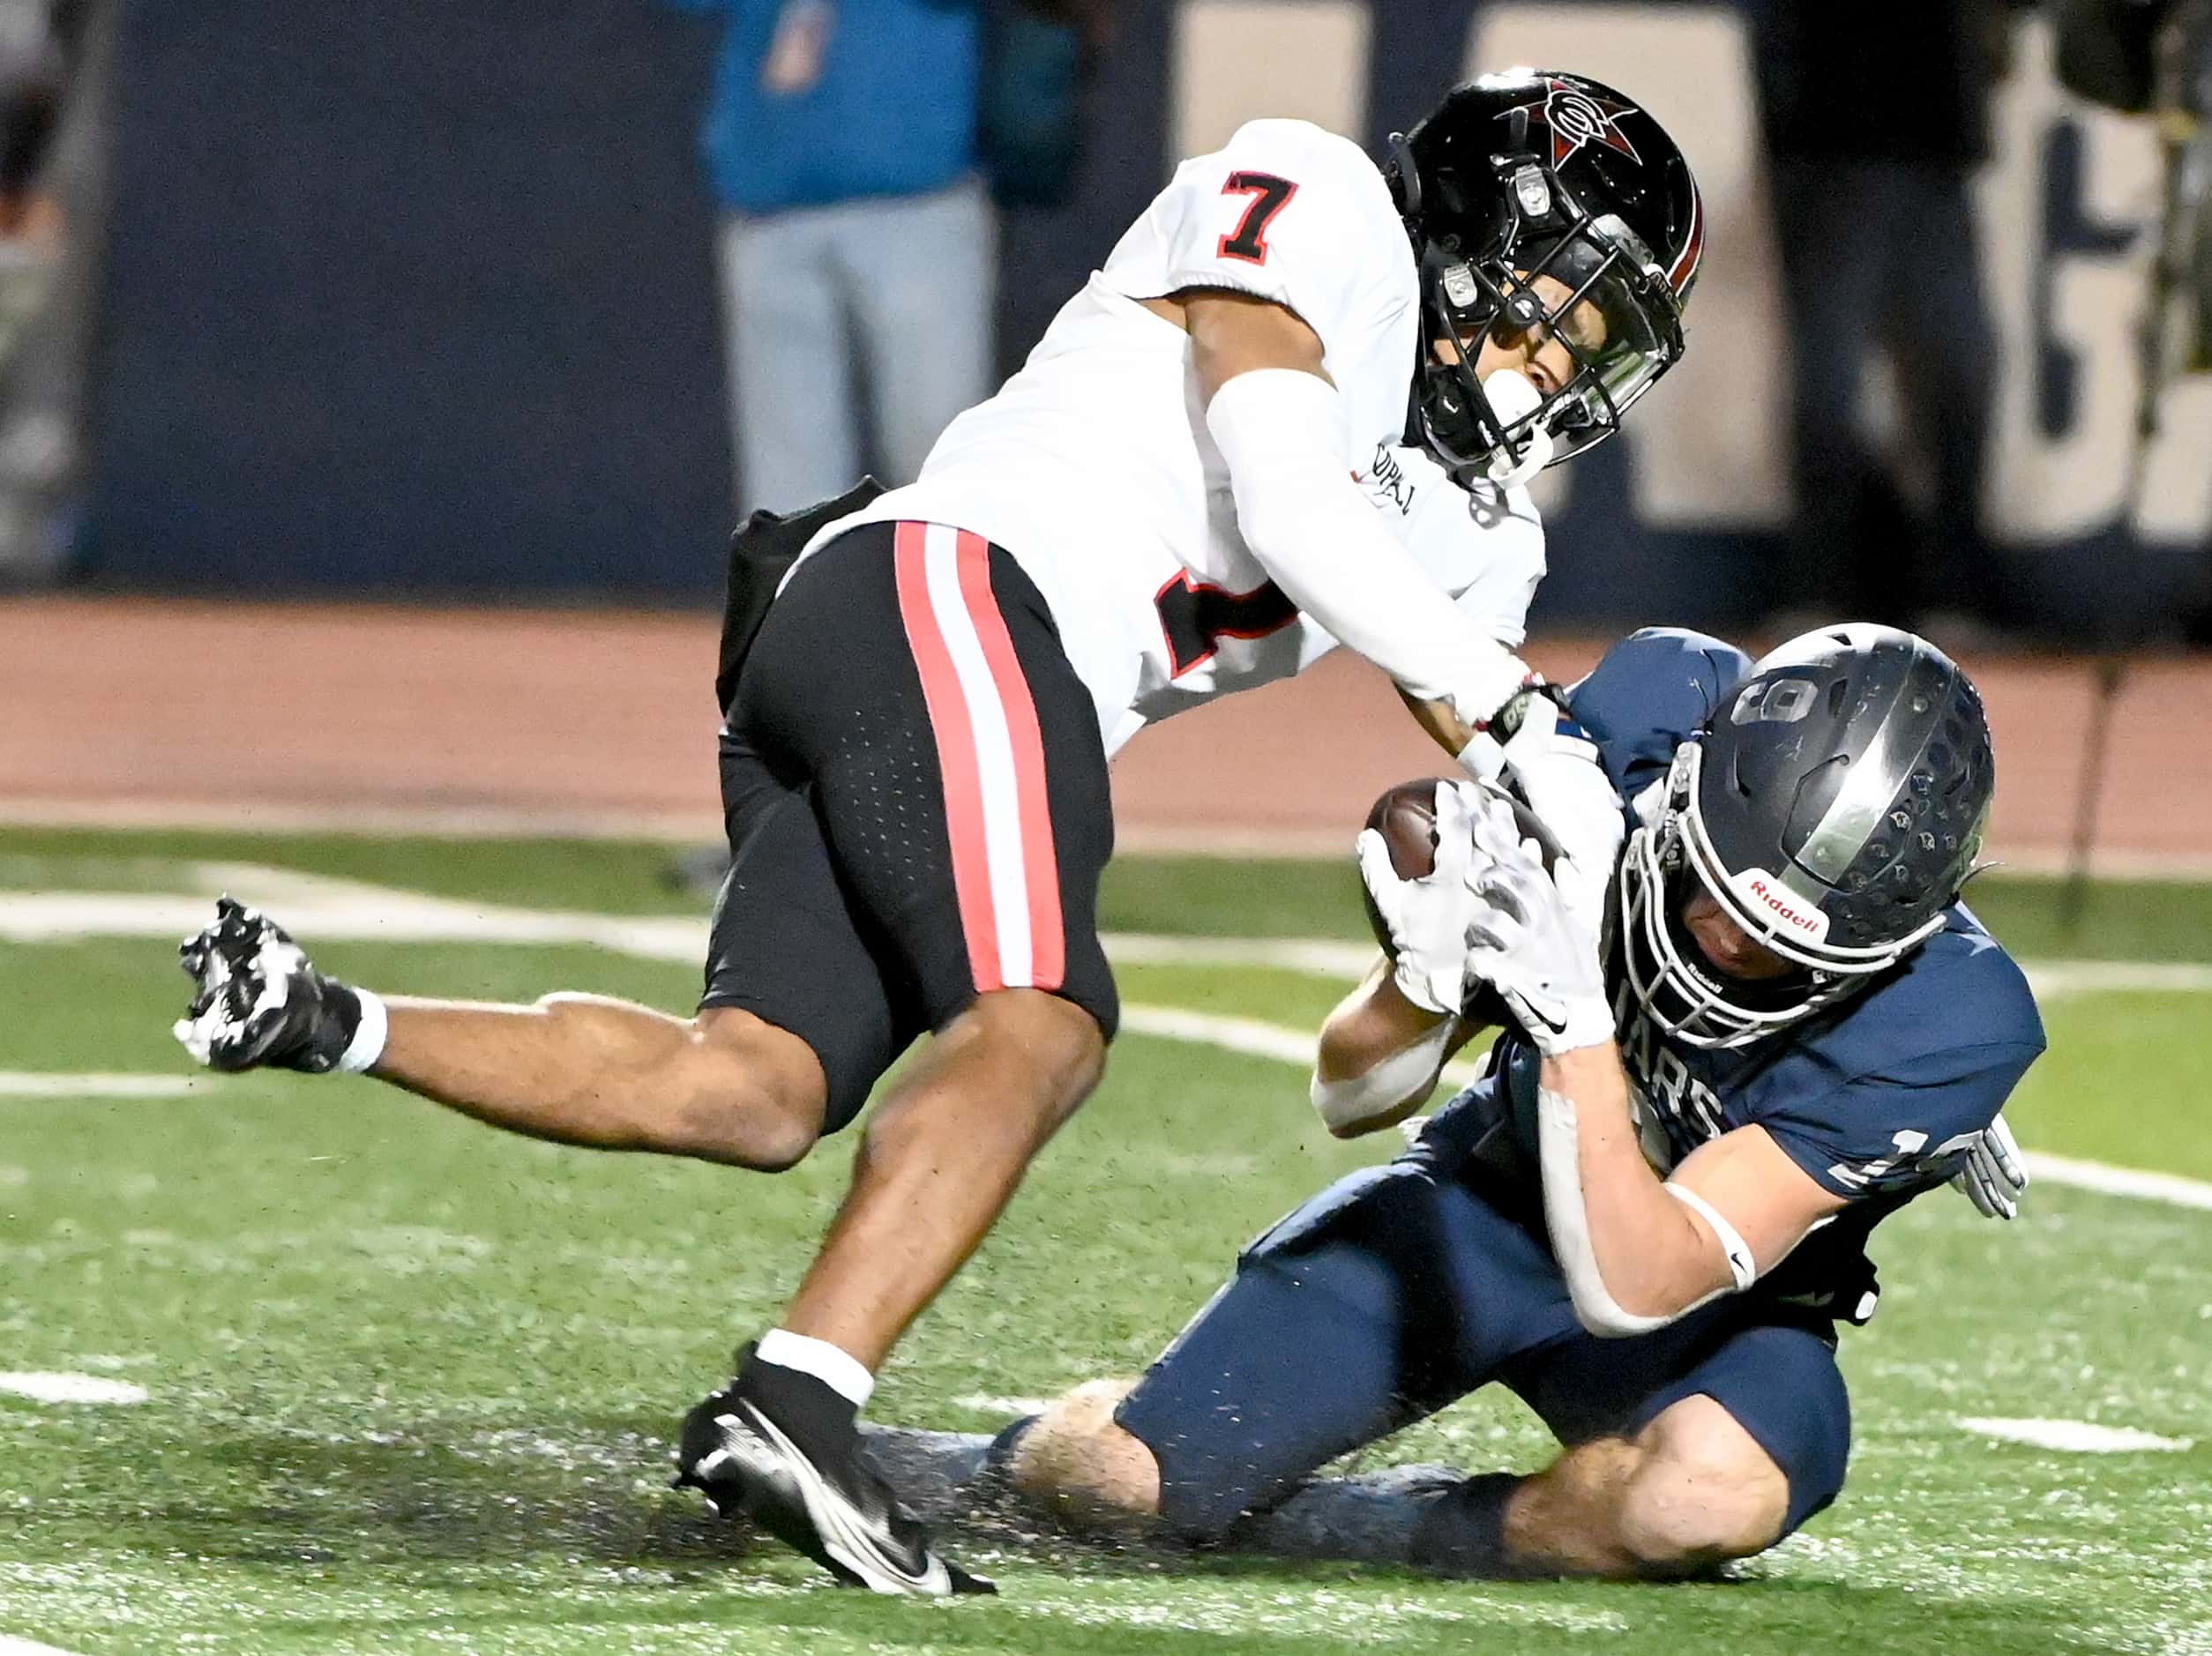 Flower Mound's Cade Edlein (19) is tackled by Coppell's Isaiah Nichols (7) in the first half...